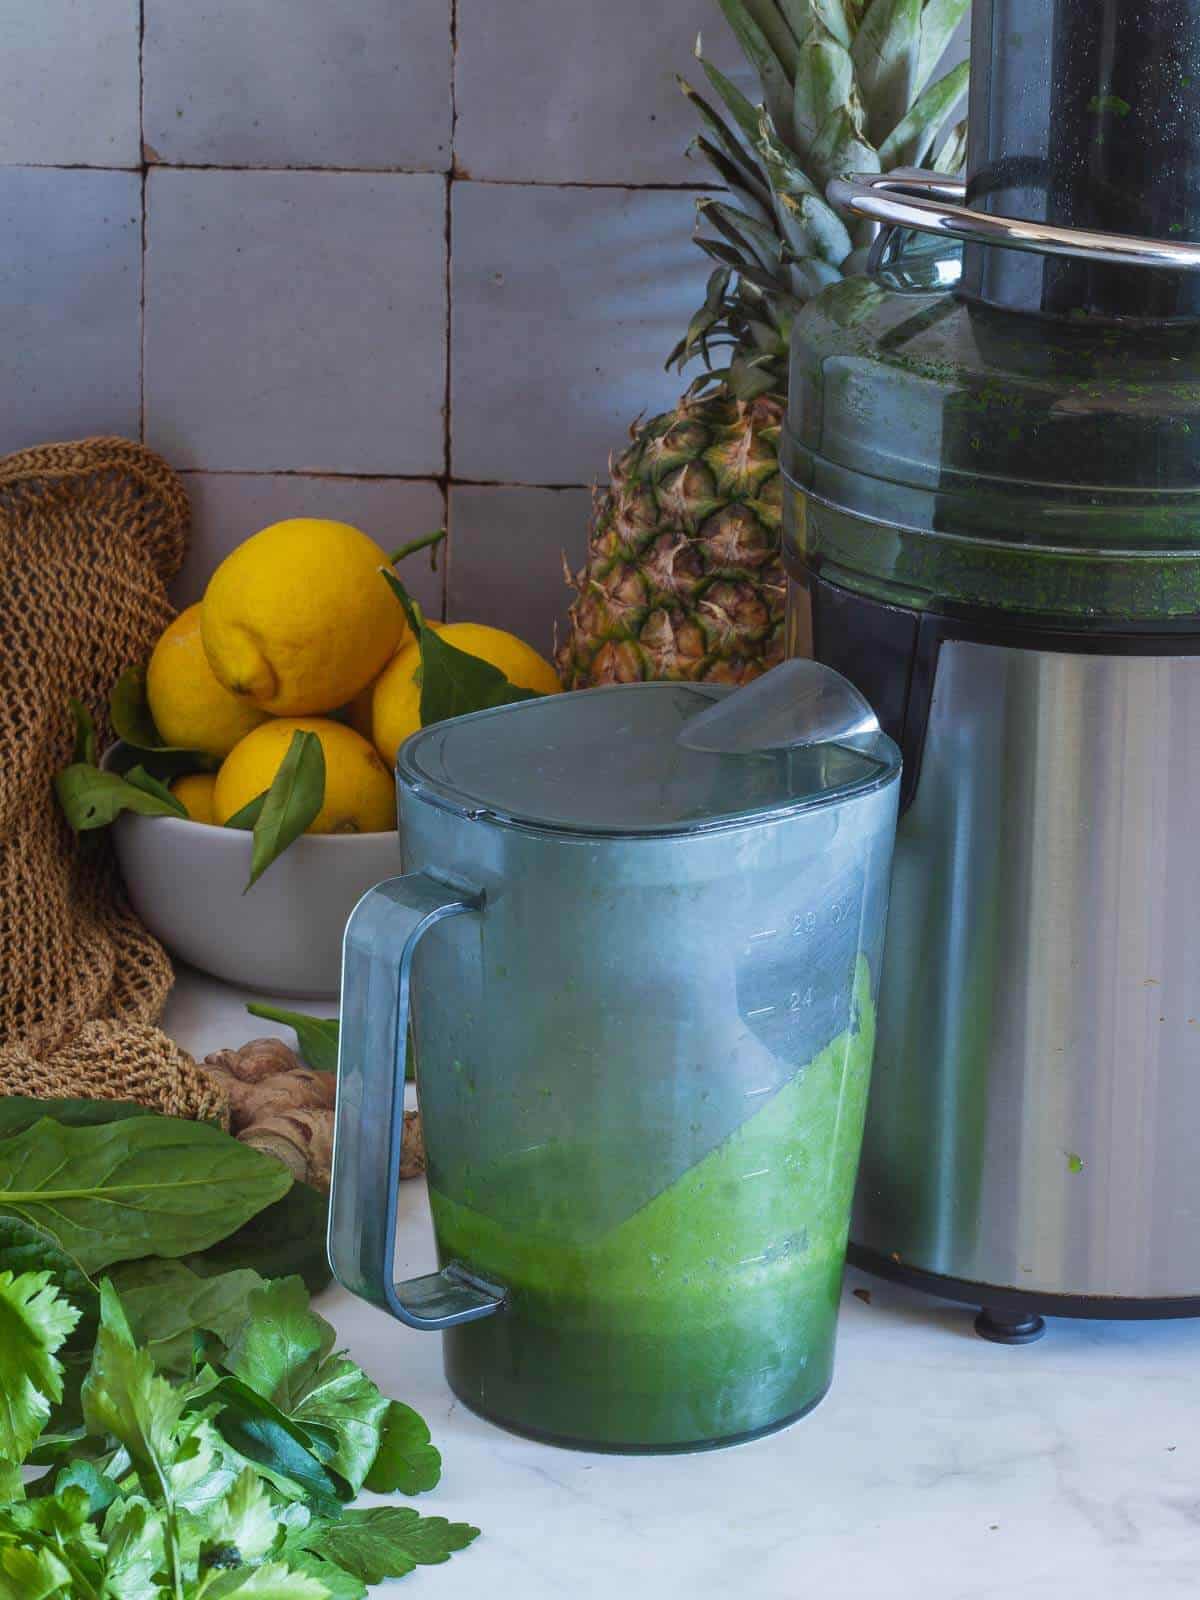 juicing Weight Loss Juice in a juicer